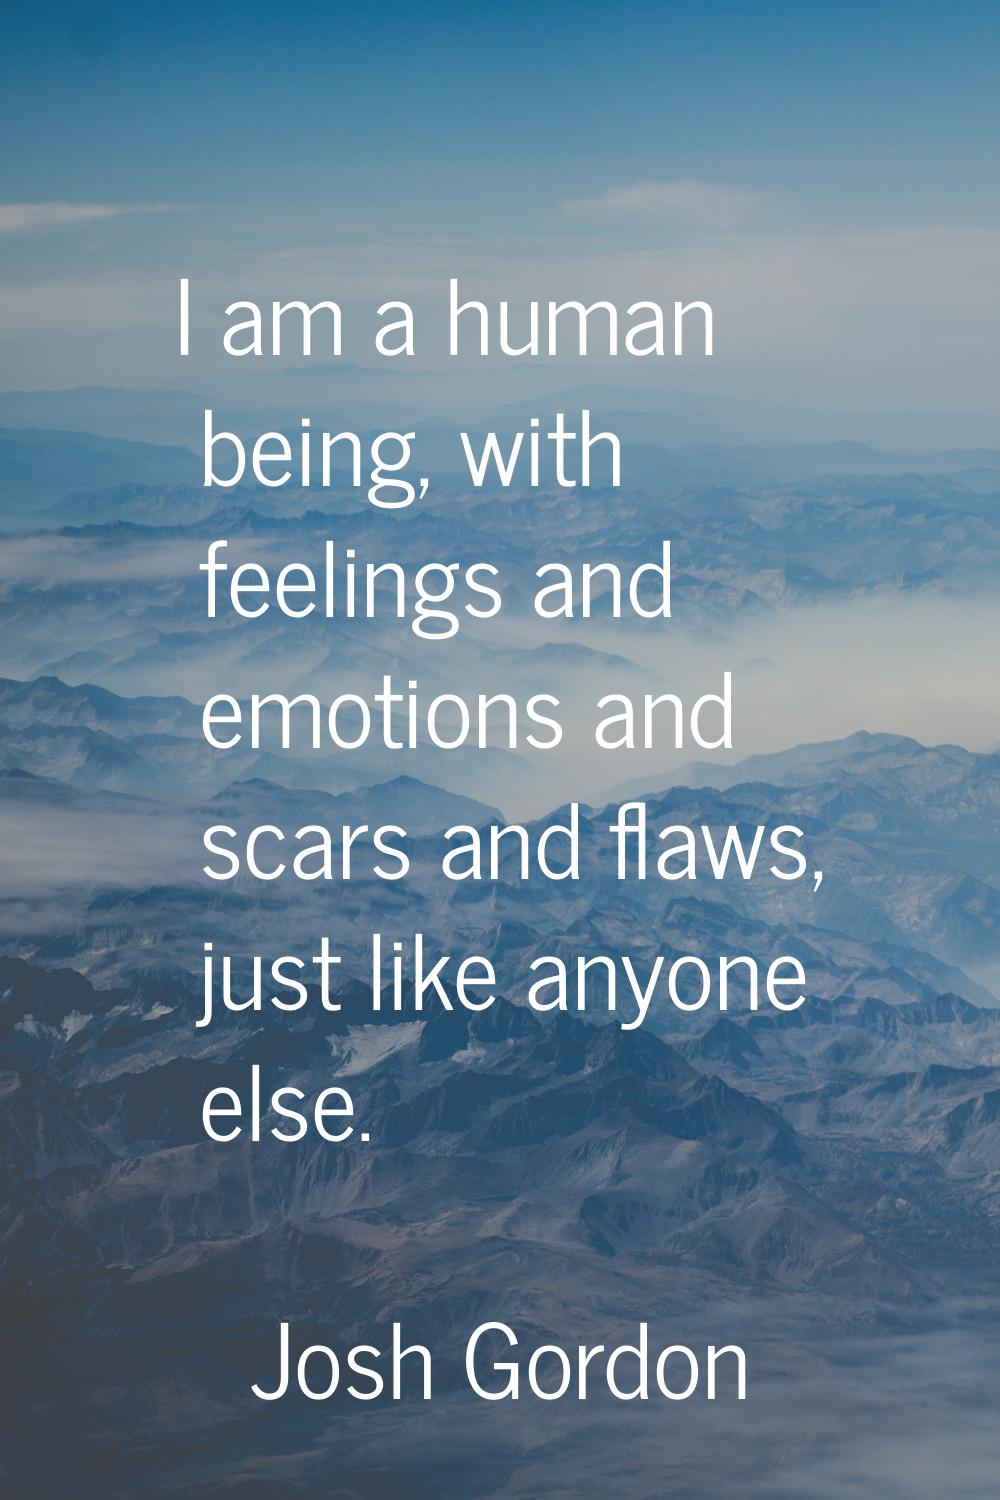 I am a human being, with feelings and emotions and scars and flaws, just like anyone else.